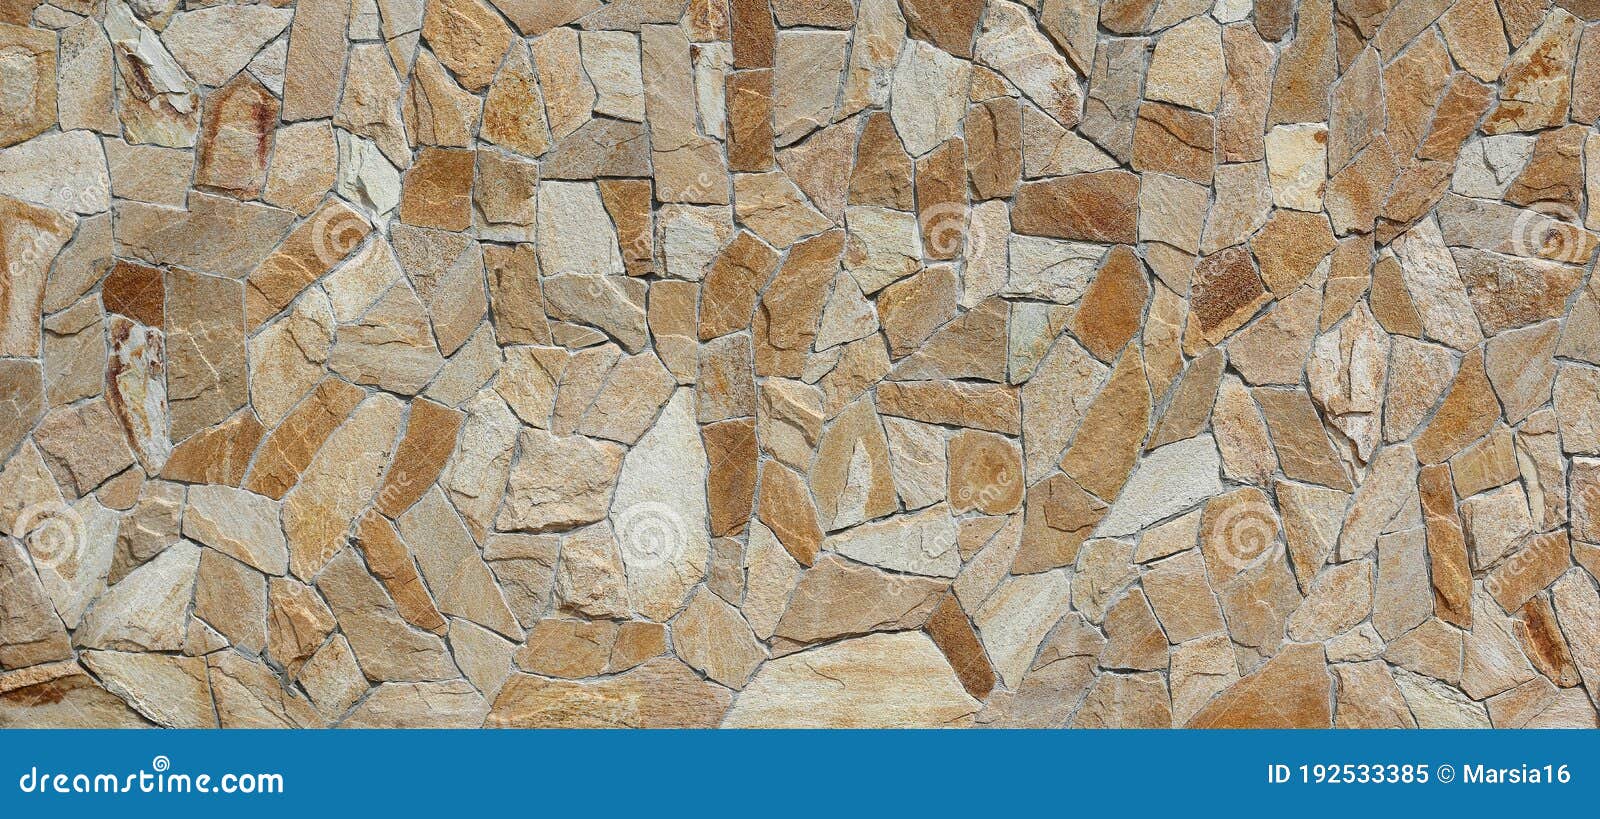 vintage wall texture from stone form. stonework